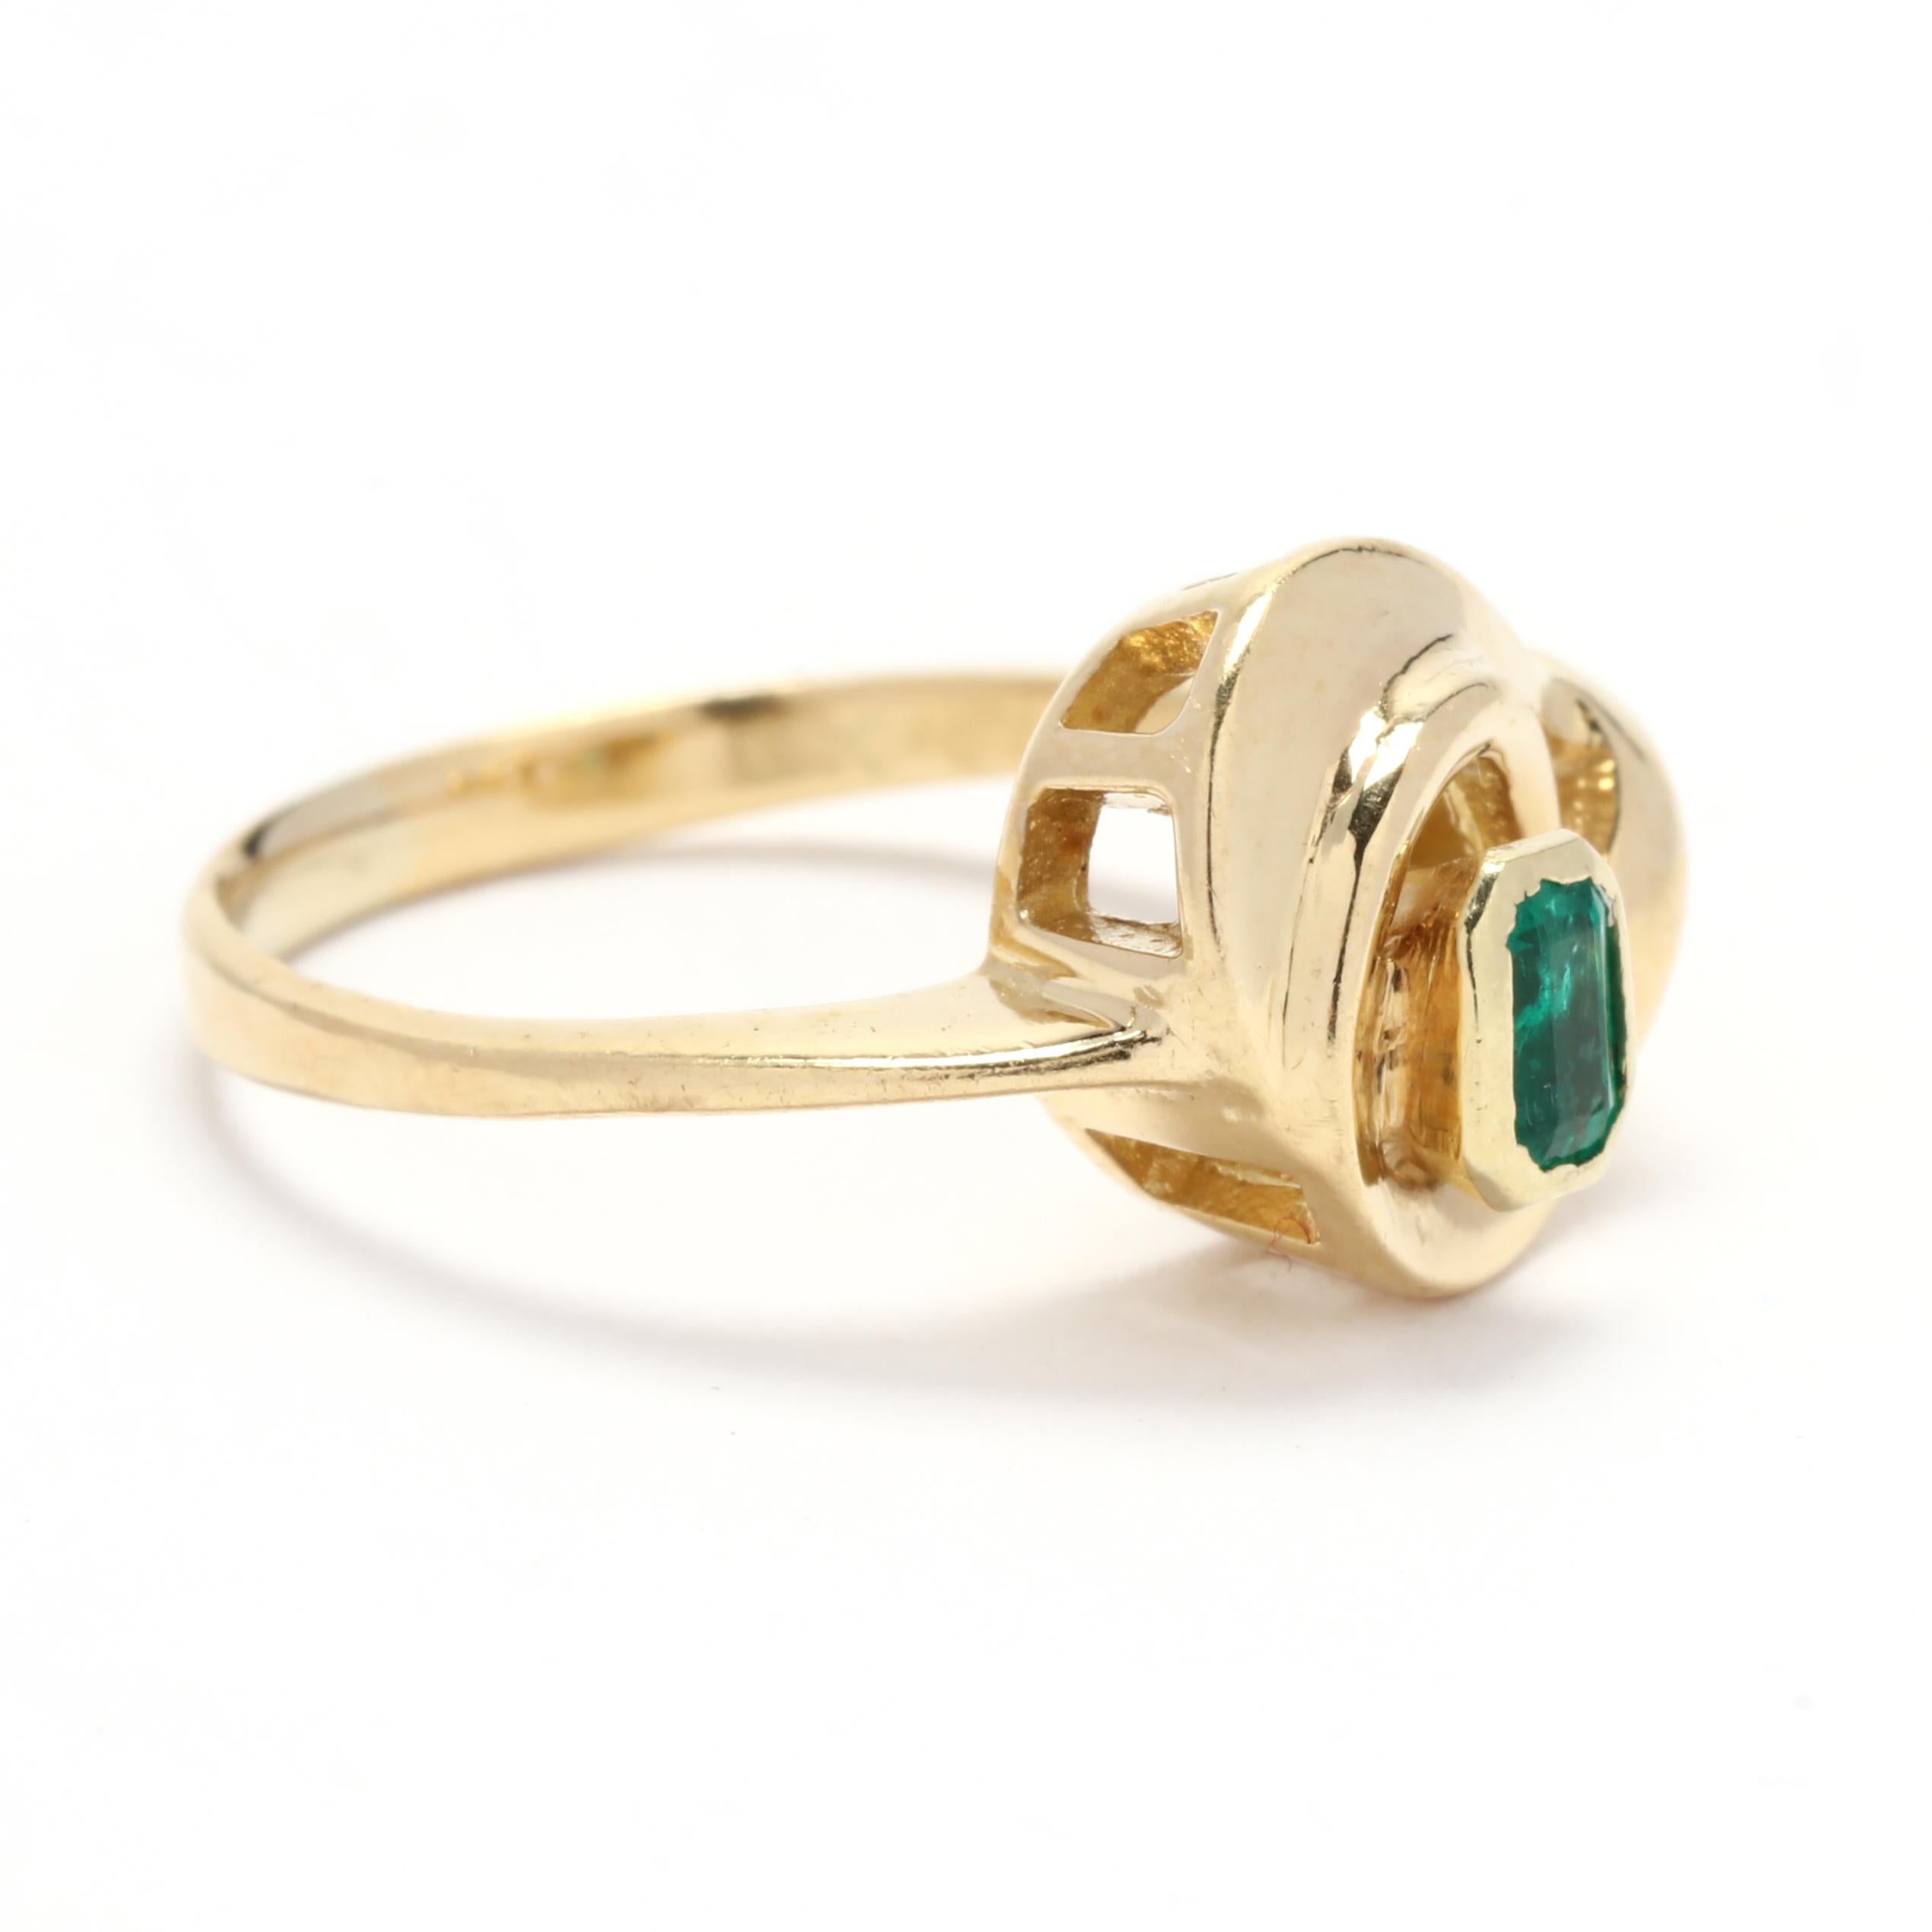 Elevate your style with this exquisite 0.20ctw Emerald Modern Ring. Crafted in 18K yellow gold, this ring boasts a beautiful emerald gemstone and a modern, swirling design. The emerald is a vivid green color, known for its rich and vibrant hue. With